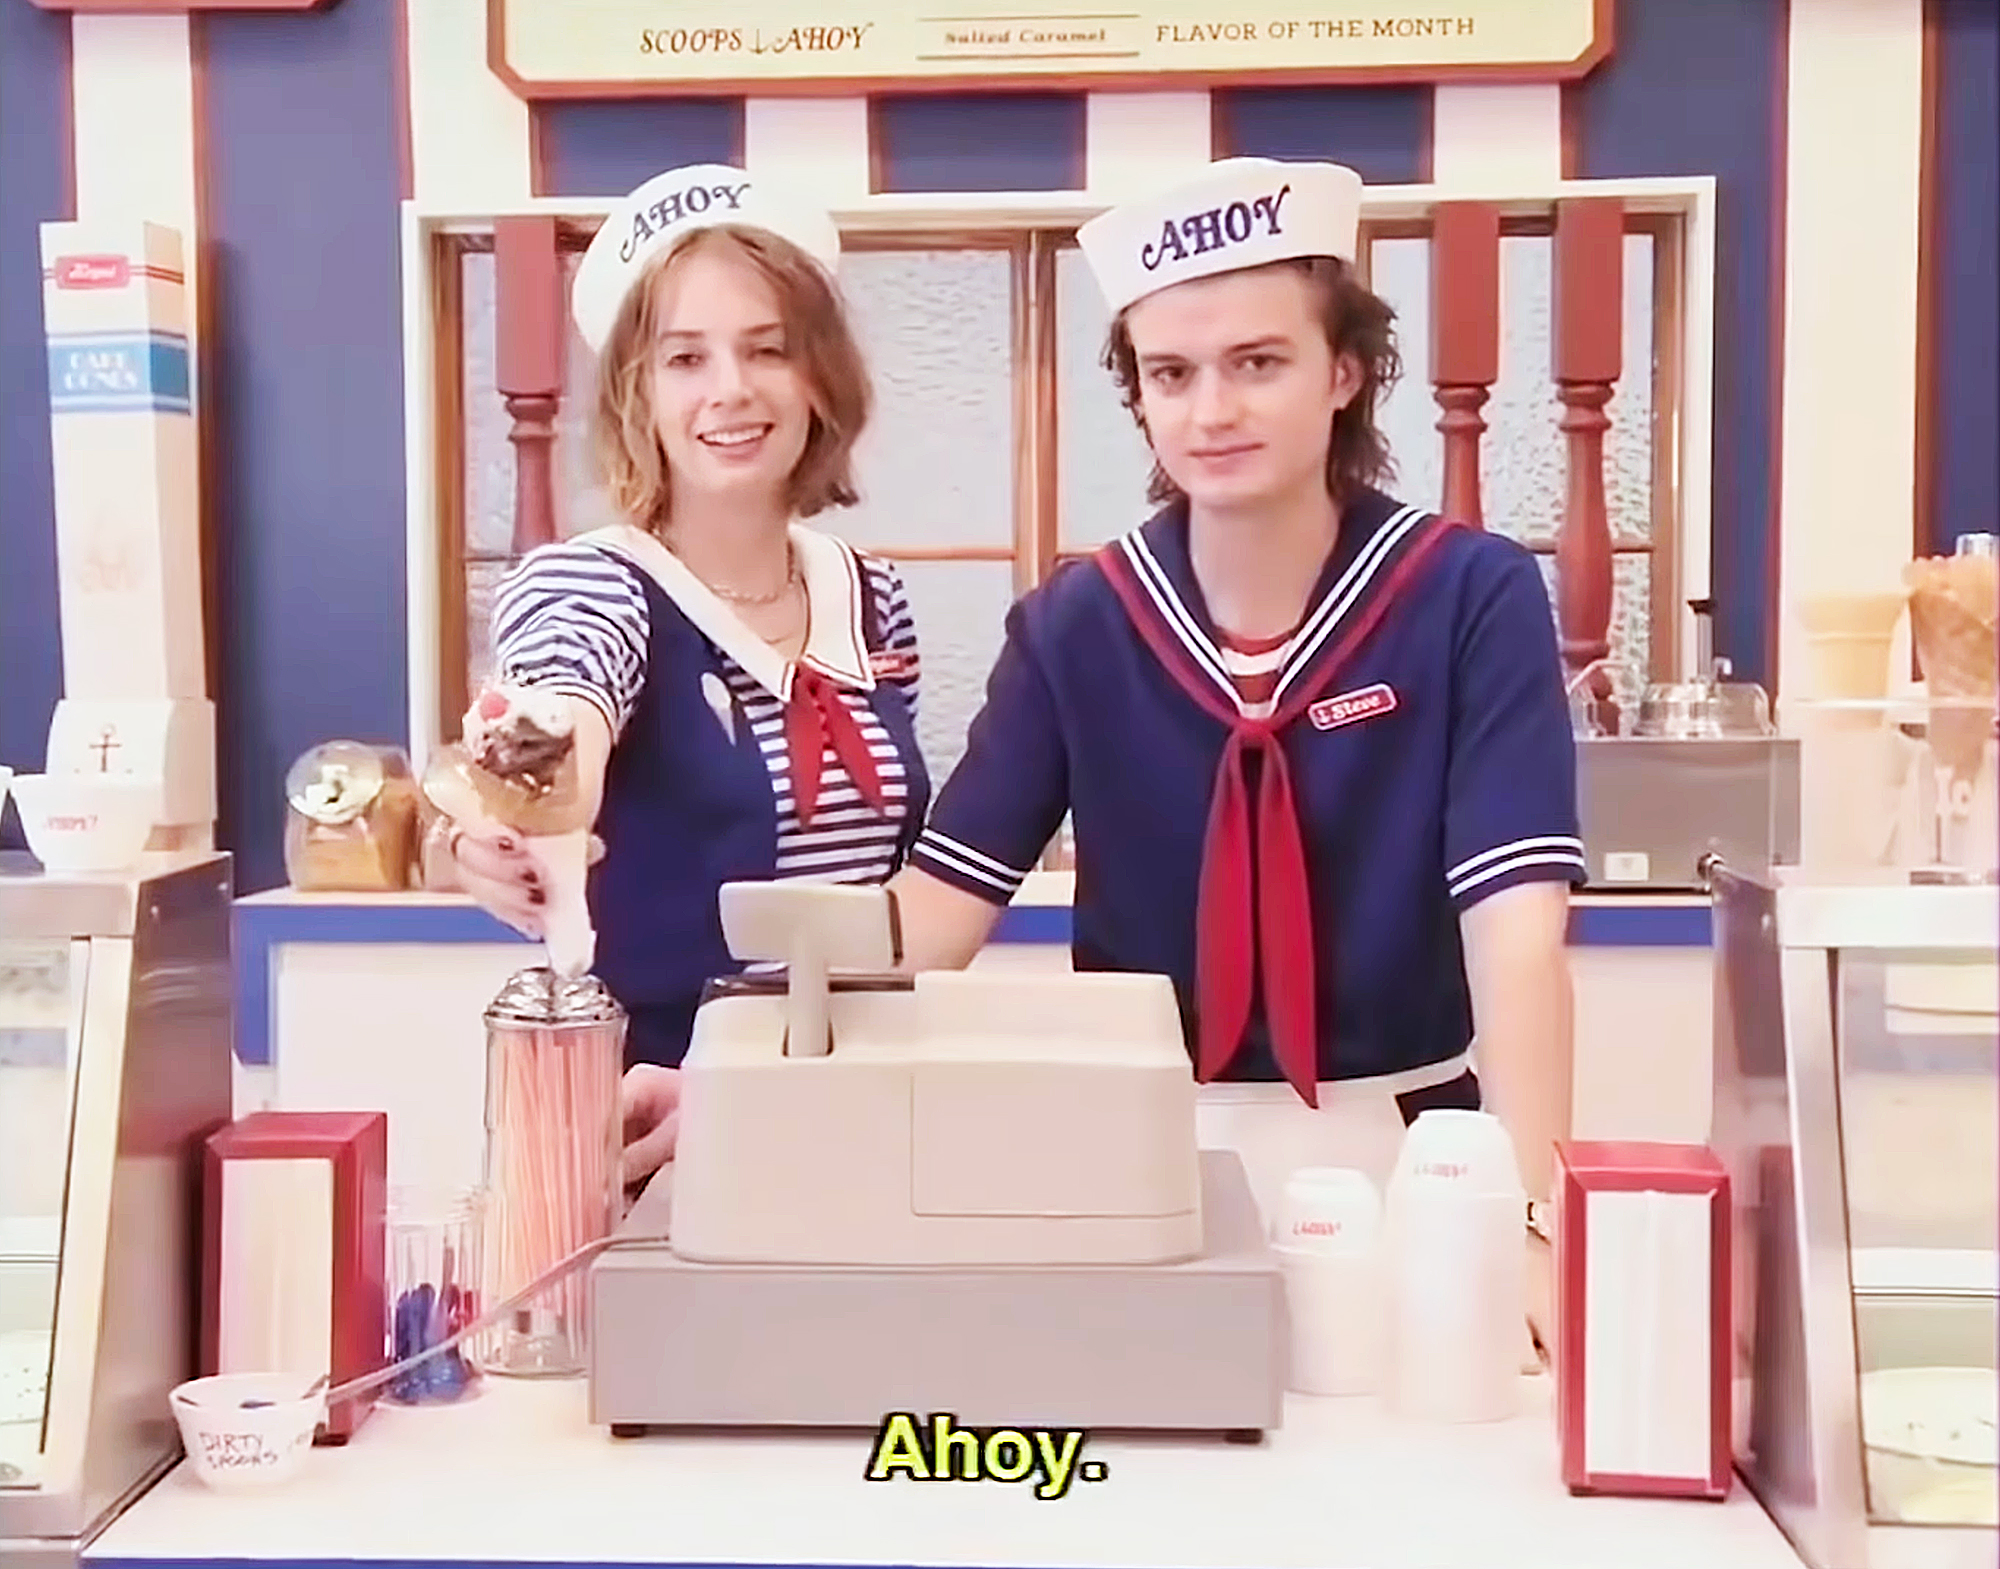 Stranger Things' Is Coming to Life With Ice Cream Shop: Photo